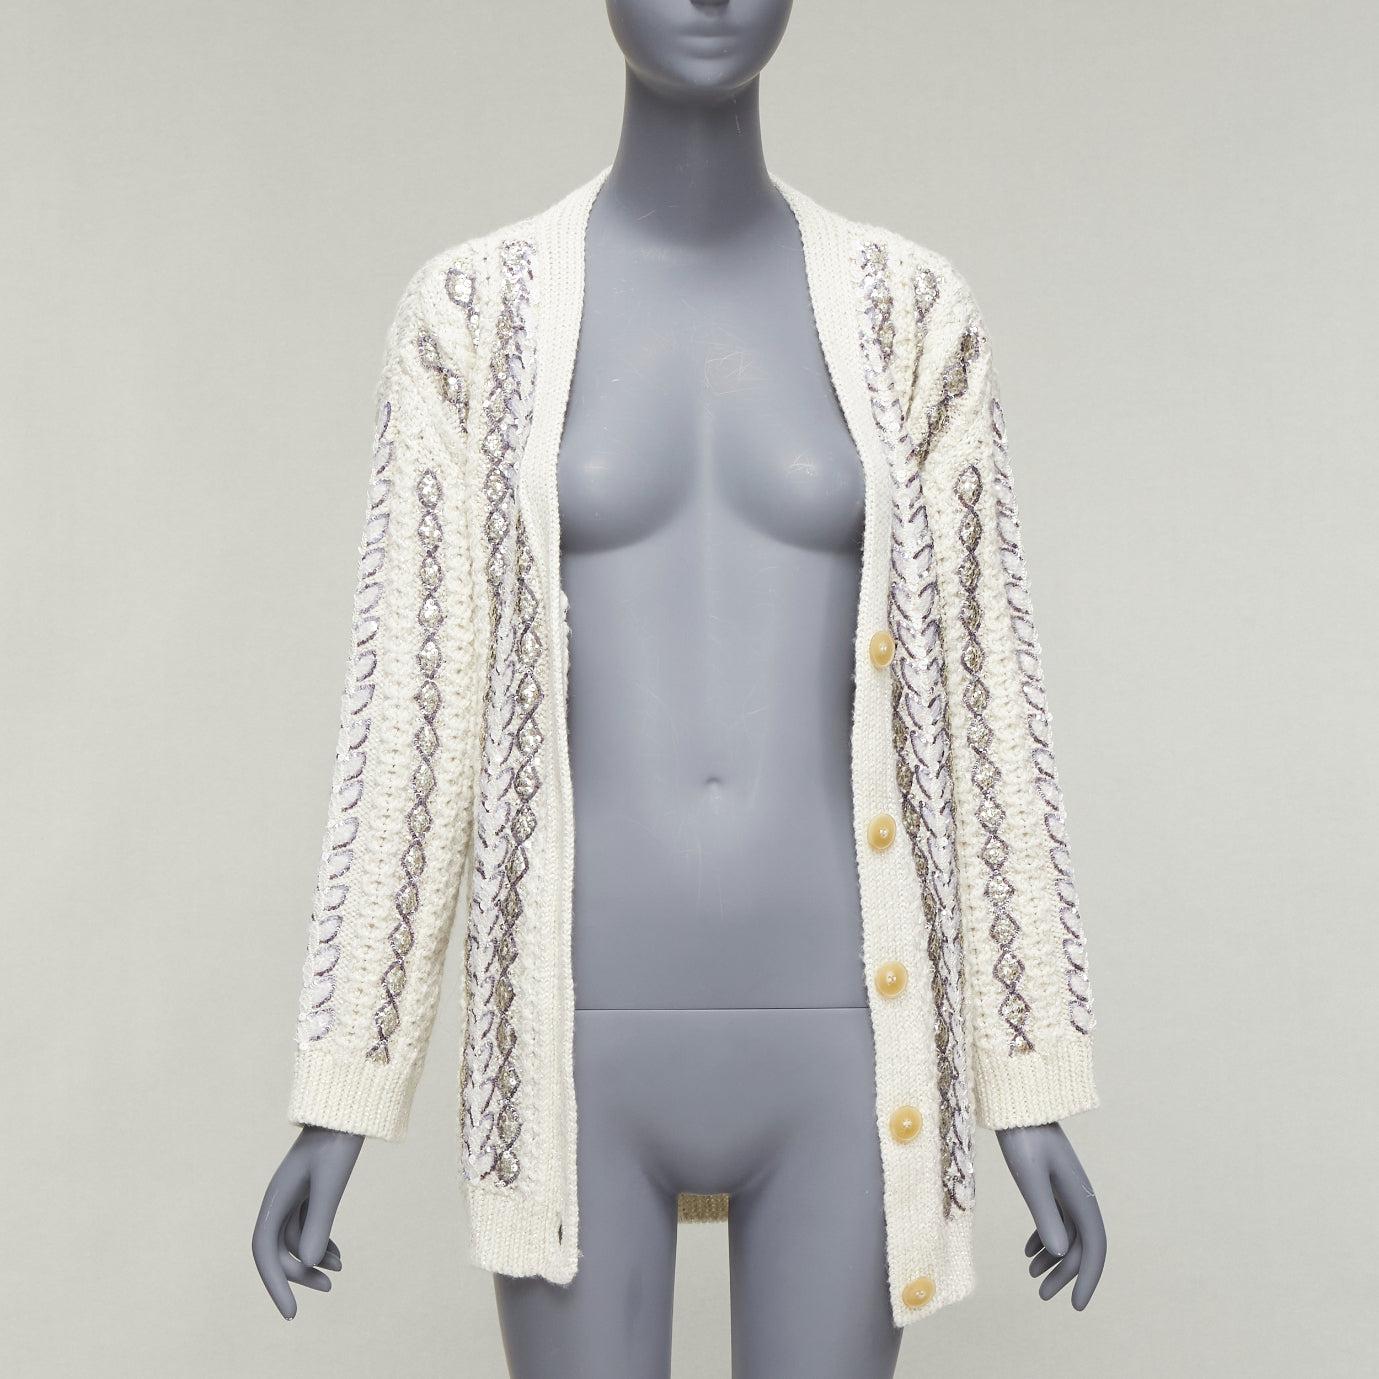 VALENTINO 2023 cream silver wool sequin logo embellished cardigan IT36 S
Reference: AAWC/A00622
Brand: Valentino
Designer: Pier Paolo Piccioli
Collection: 2023
Material: Wool, Blend
Color: Cream, Silver
Pattern: Sequins
Closure: Button
Extra